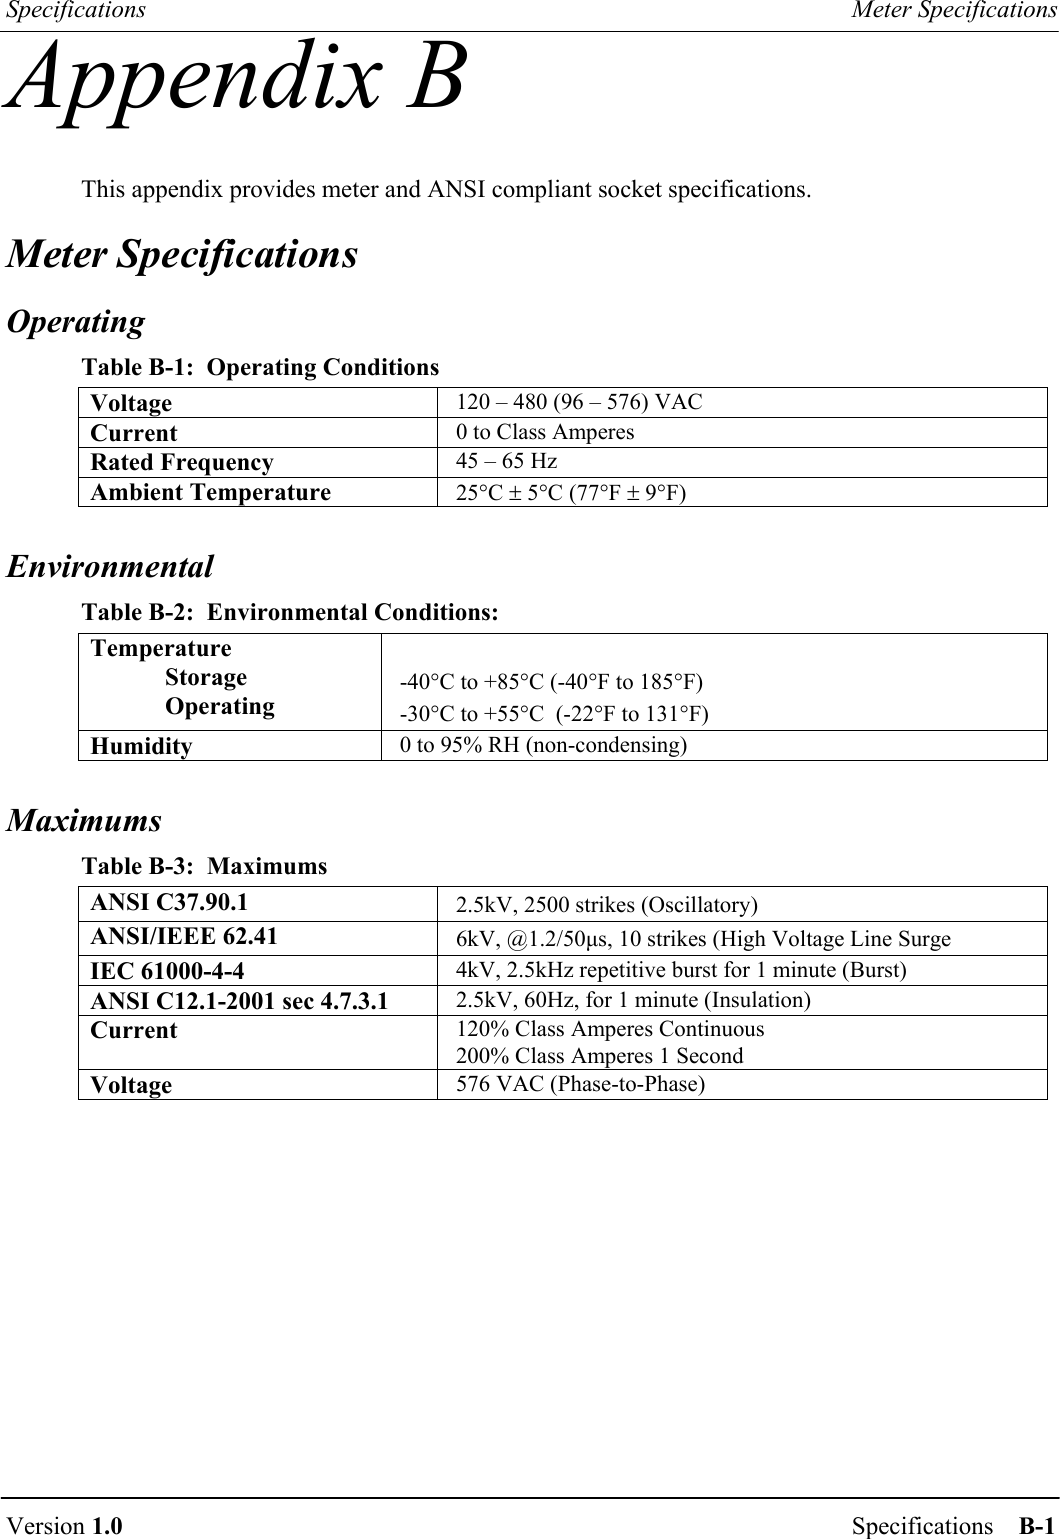 Specifications  Meter Specifications  Version 1.0  Specifications    B-1  Appendix B This appendix provides meter and ANSI compliant socket specifications. Meter Specifications Operating Table B-1:  Operating Conditions Voltage  120 – 480 (96 – 576) VAC Current  0 to Class Amperes Rated Frequency  45 – 65 Hz Ambient Temperature  25°C ± 5°C (77°F ± 9°F)   Environmental Table B-2:  Environmental Conditions: Temperature  Storage  Operating  -40°C to +85°C (-40°F to 185°F) -30°C to +55°C  (-22°F to 131°F) Humidity  0 to 95% RH (non-condensing)   Maximums Table B-3:  Maximums ANSI C37.90.1  2.5kV, 2500 strikes (Oscillatory) ANSI/IEEE 62.41  6kV, @1.2/50µs, 10 strikes (High Voltage Line Surge IEC 61000-4-4  4kV, 2.5kHz repetitive burst for 1 minute (Burst) ANSI C12.1-2001 sec 4.7.3.1  2.5kV, 60Hz, for 1 minute (Insulation) Current  120% Class Amperes Continuous 200% Class Amperes 1 Second Voltage  576 VAC (Phase-to-Phase)  